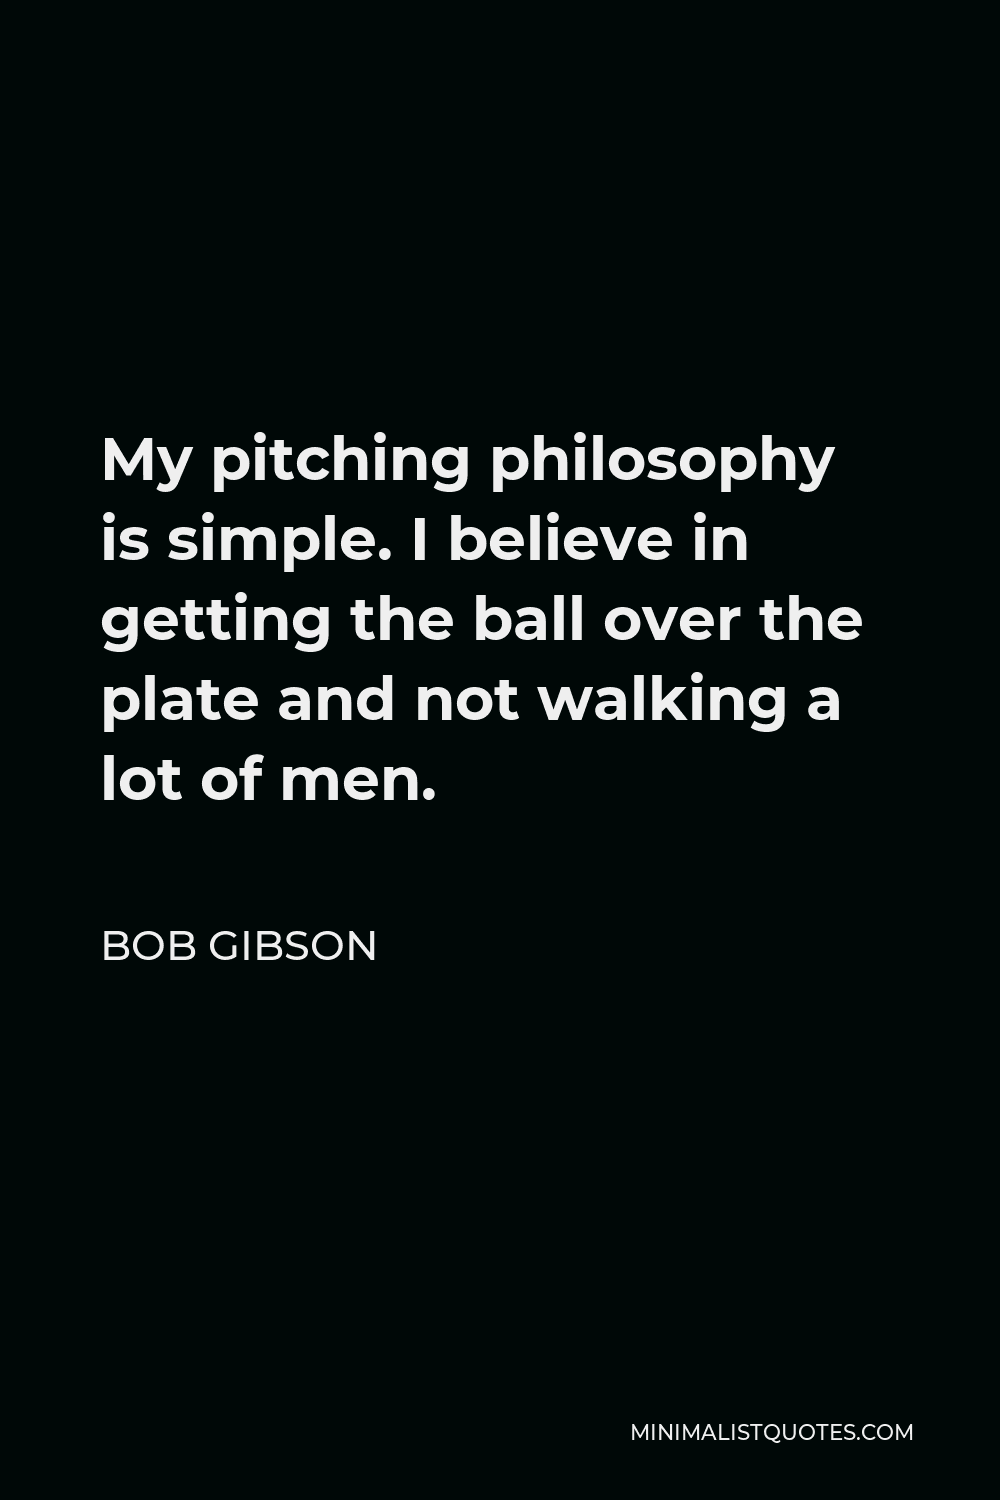 Bob Gibson Quote - My pitching philosophy is simple. I believe in getting the ball over the plate and not walking a lot of men.